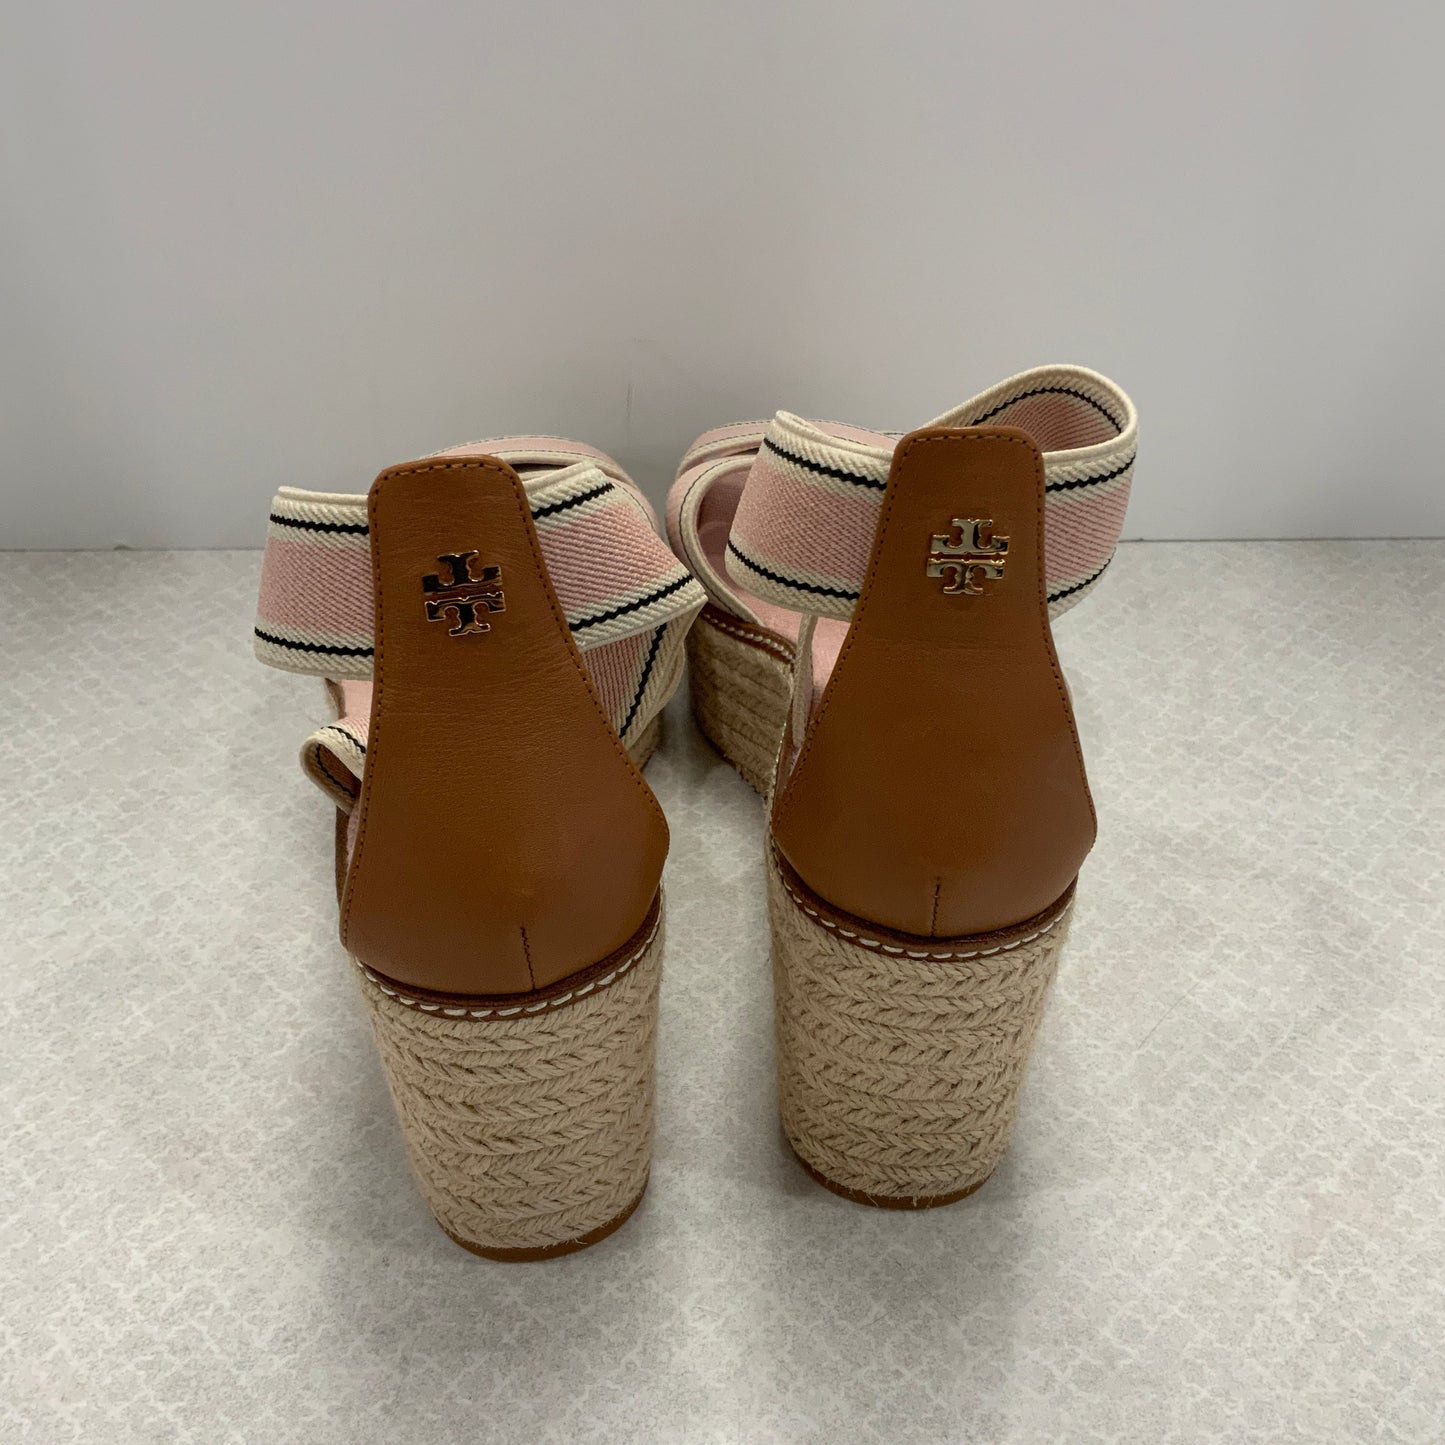 Pink Sandals Heels Wedge Tory Burch, Size 9